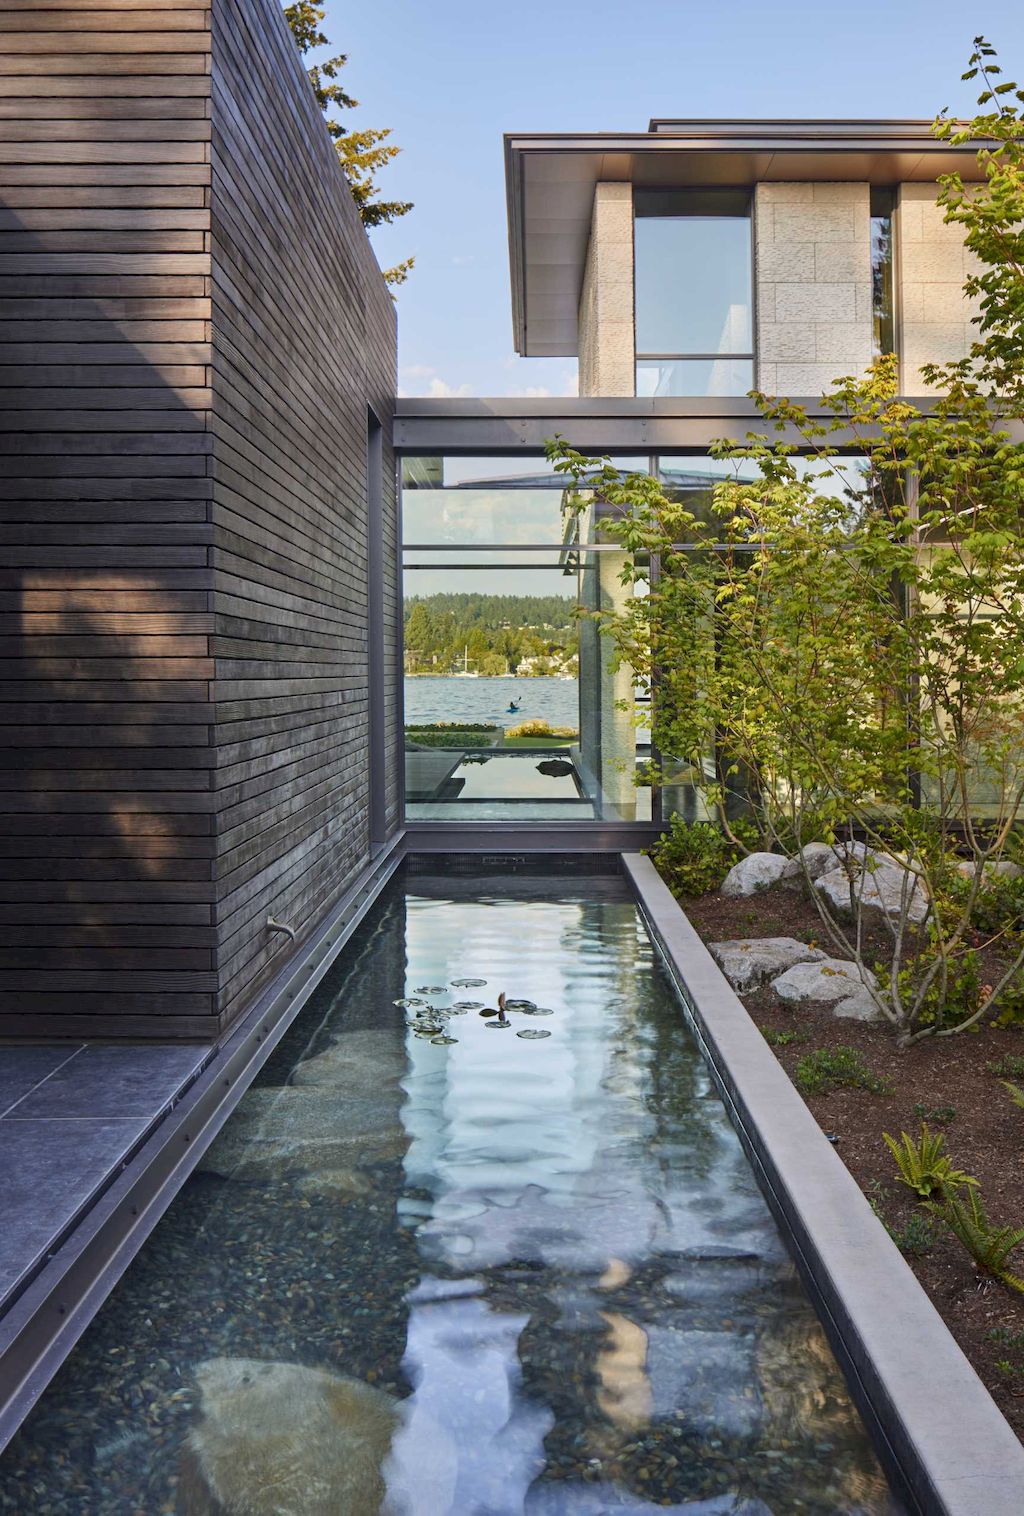 The Point House, Luxury Lakeside Home in Washington by Kor Architects